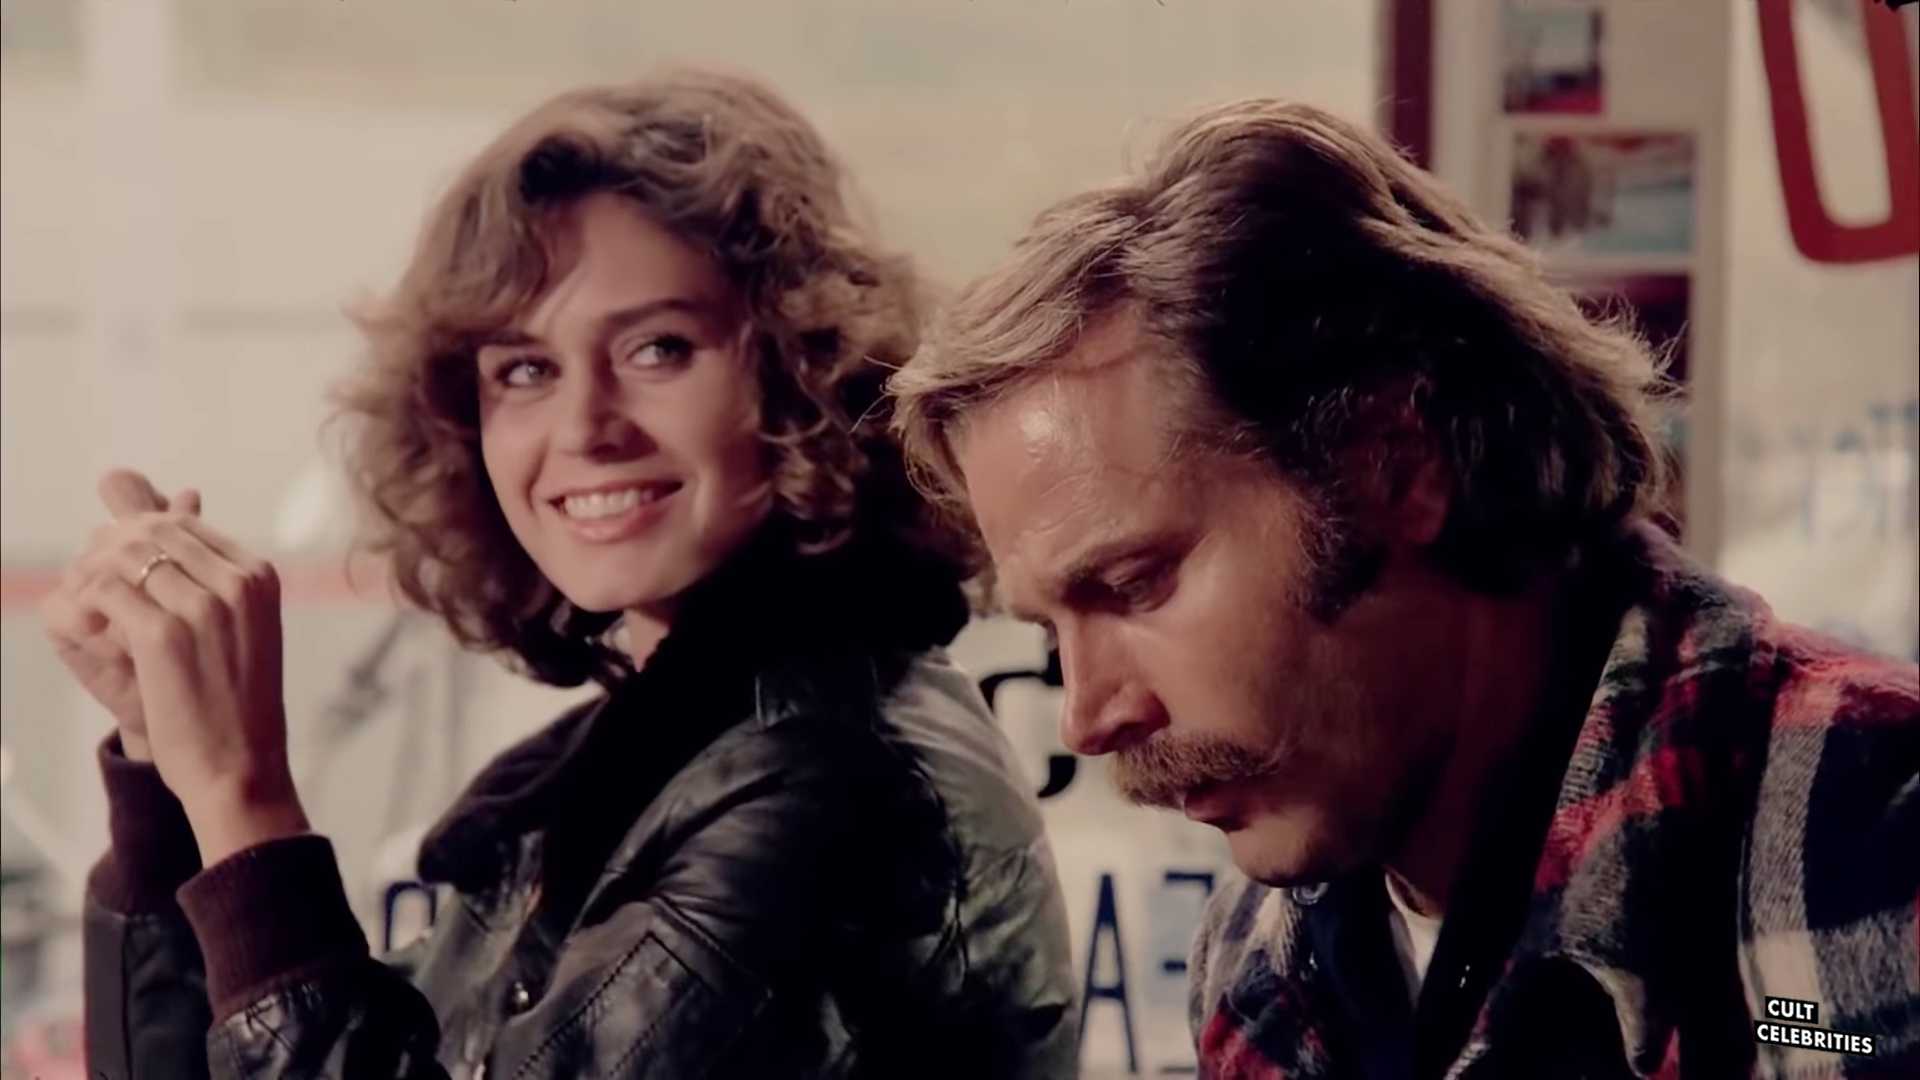 Franco Nero and Corinne Cléry in Hitch-Hike (1977)